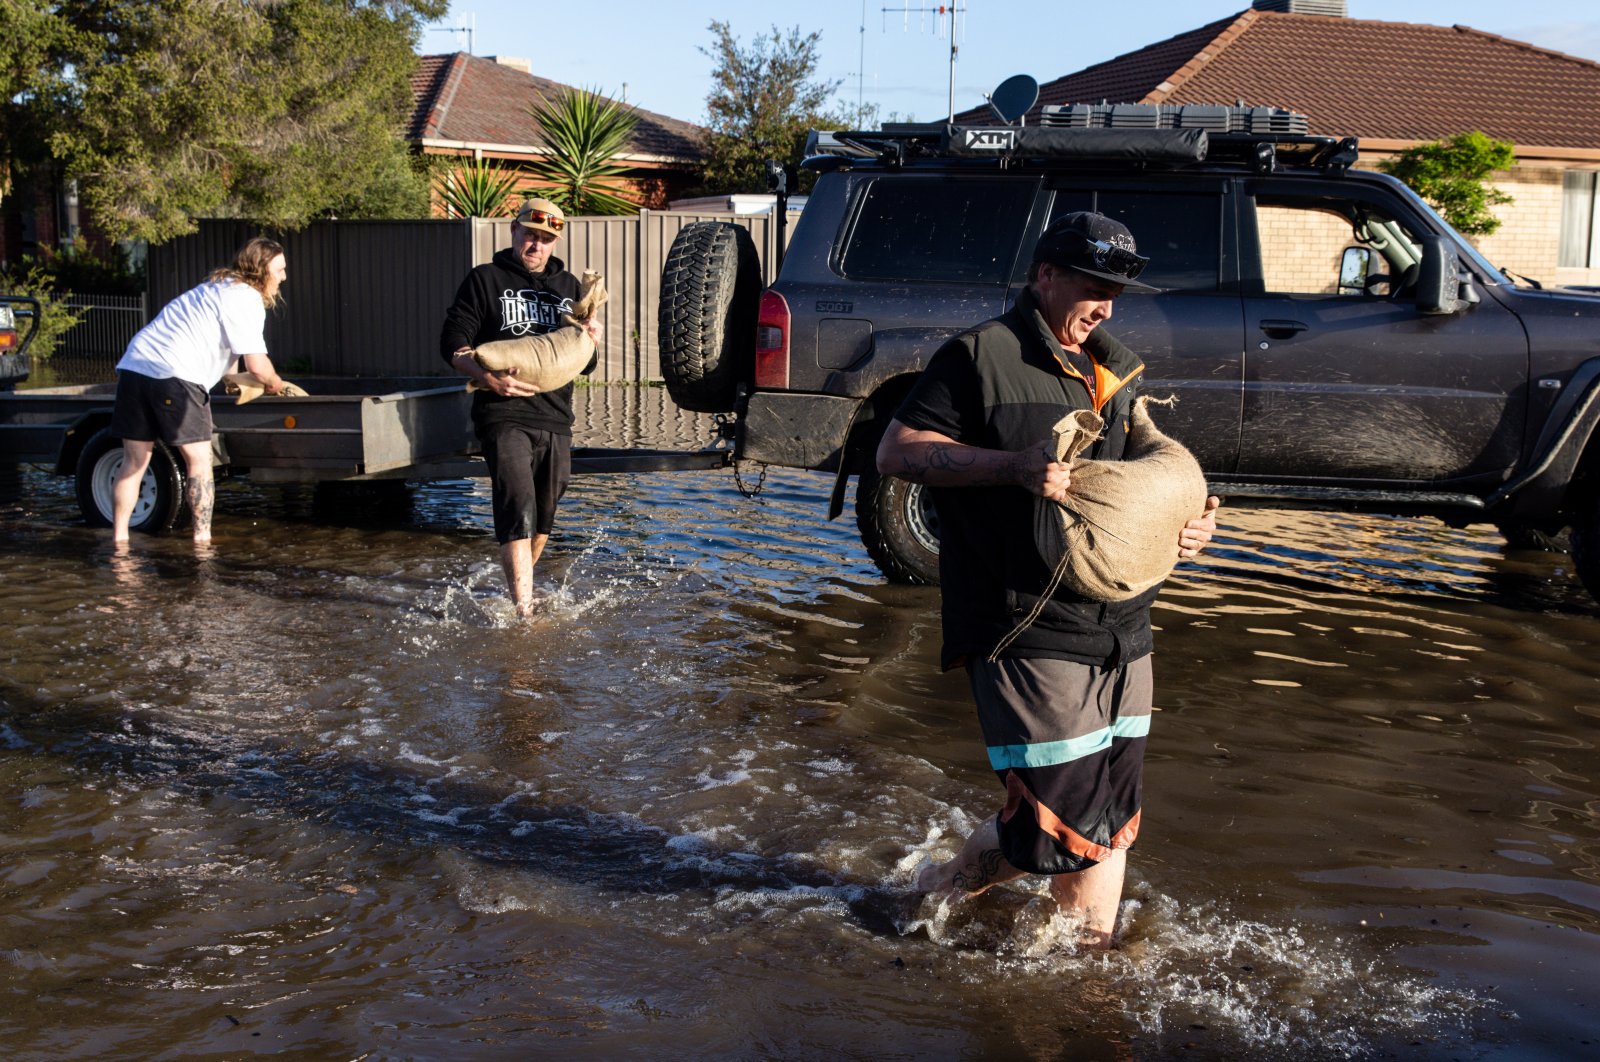 Local residents deliver sandbags to houses affected by the flood, Shepparton, Victoria, Australia, Oct. 16 2022. (EPA Photo)